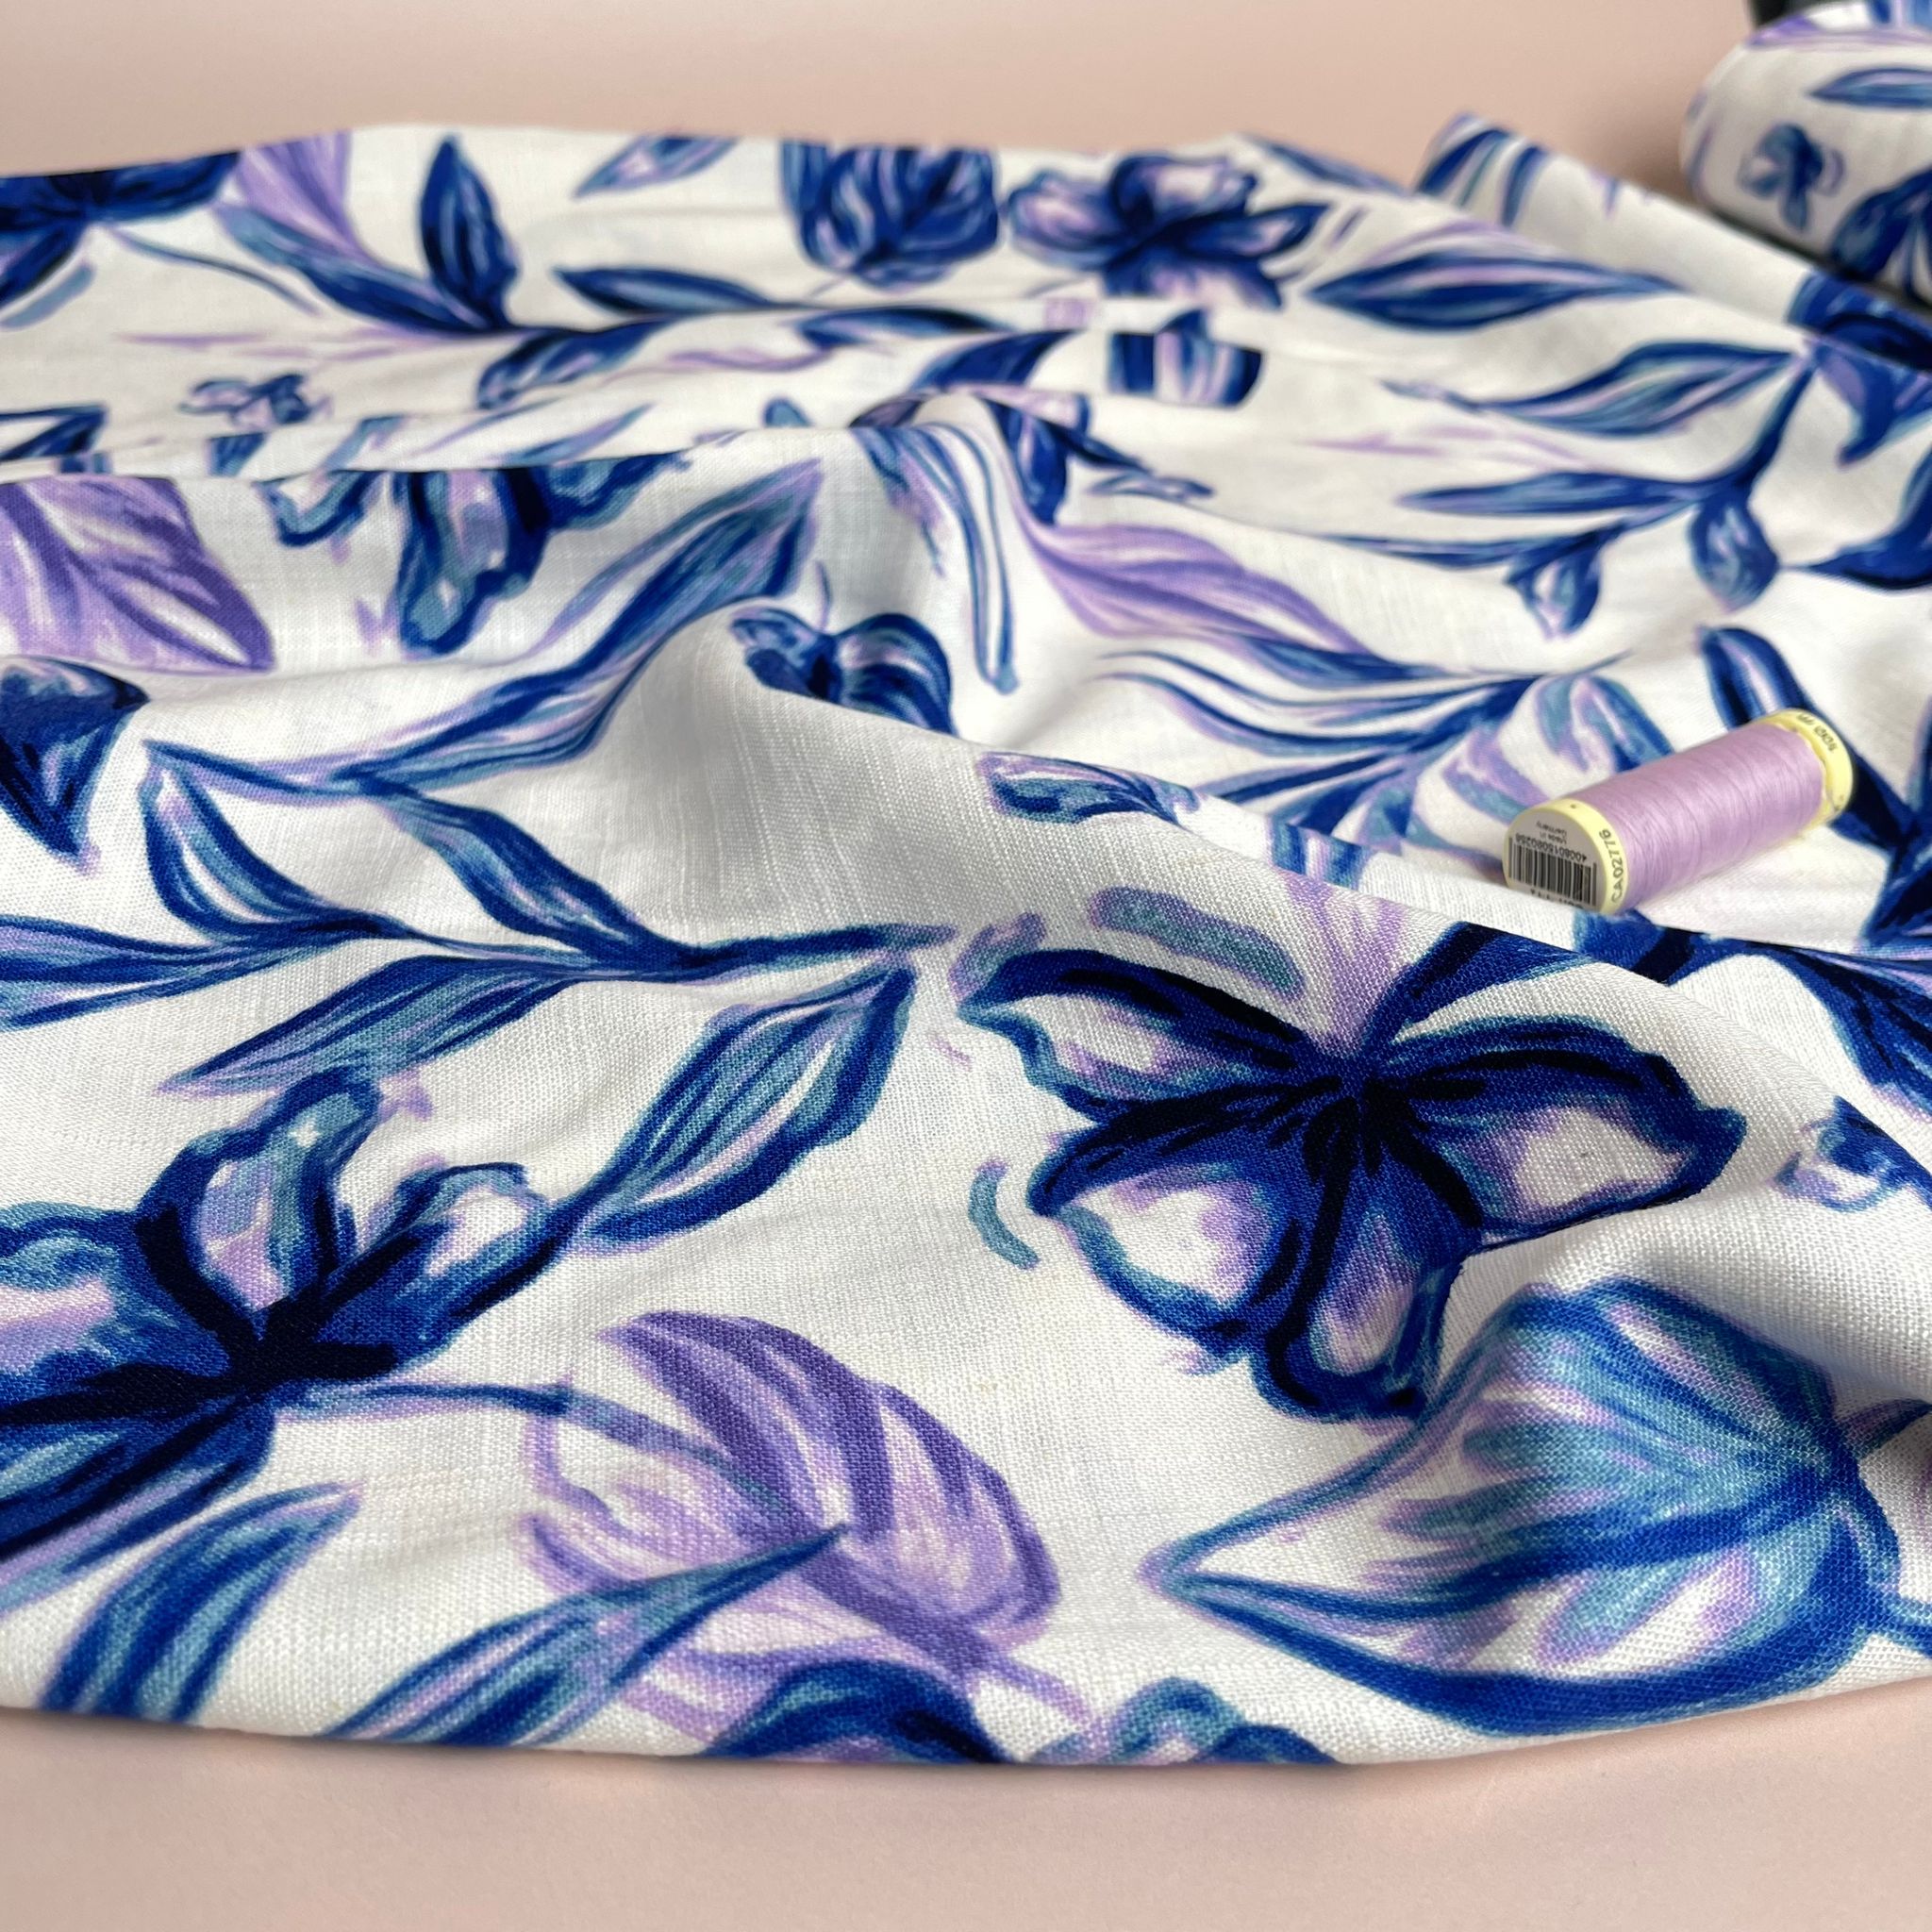 Lilac and Navy Flowers Linen Viscose Blend Fabric